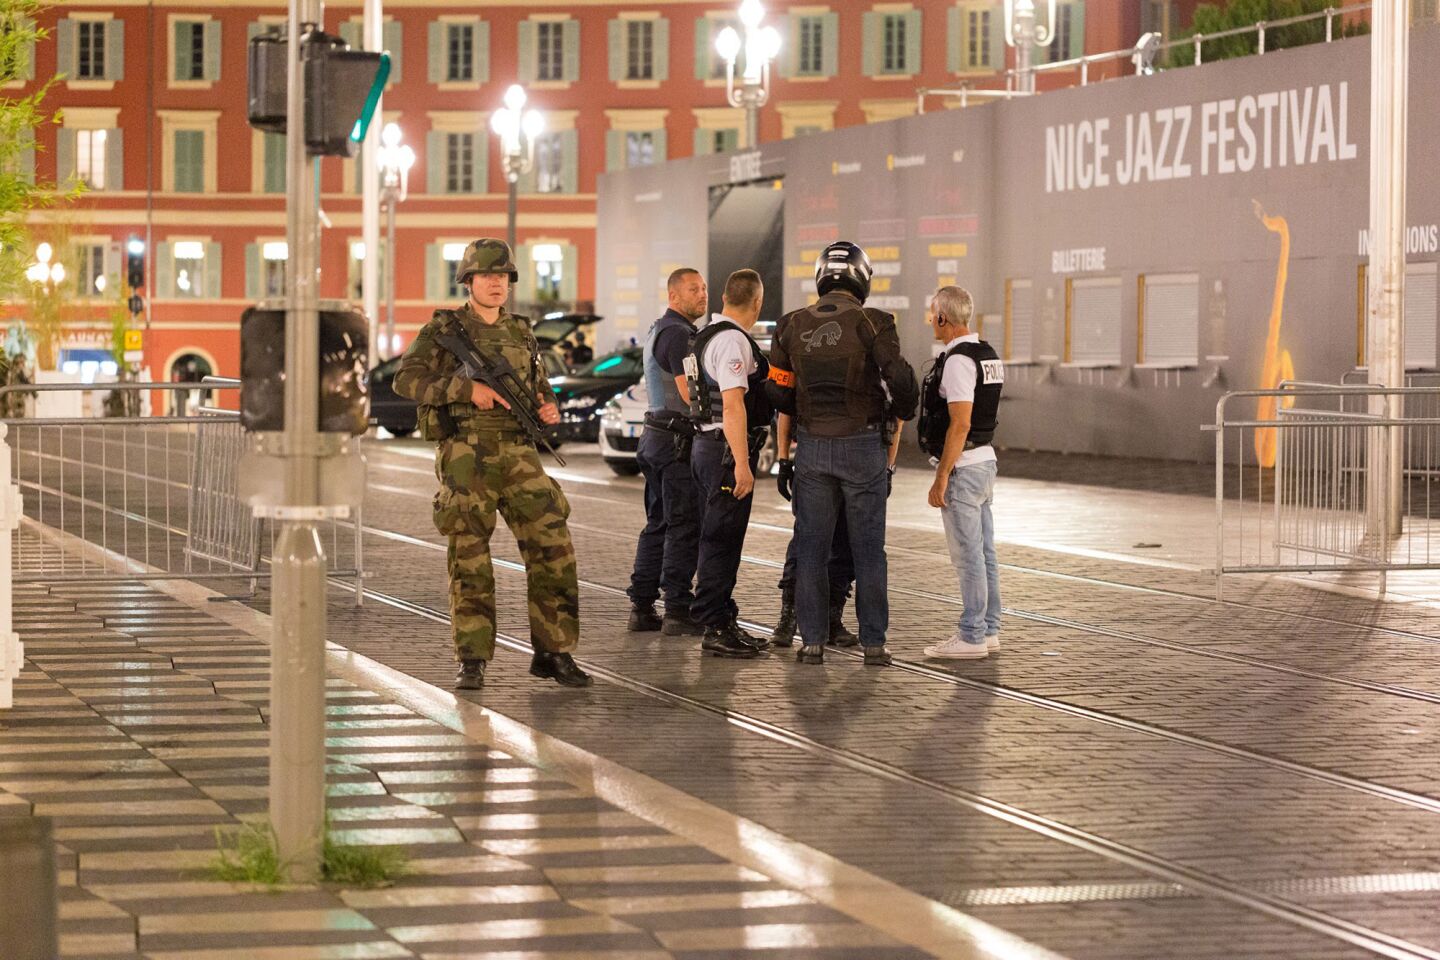 A soldier stands guard alongside police officers near the site of the truck attack.